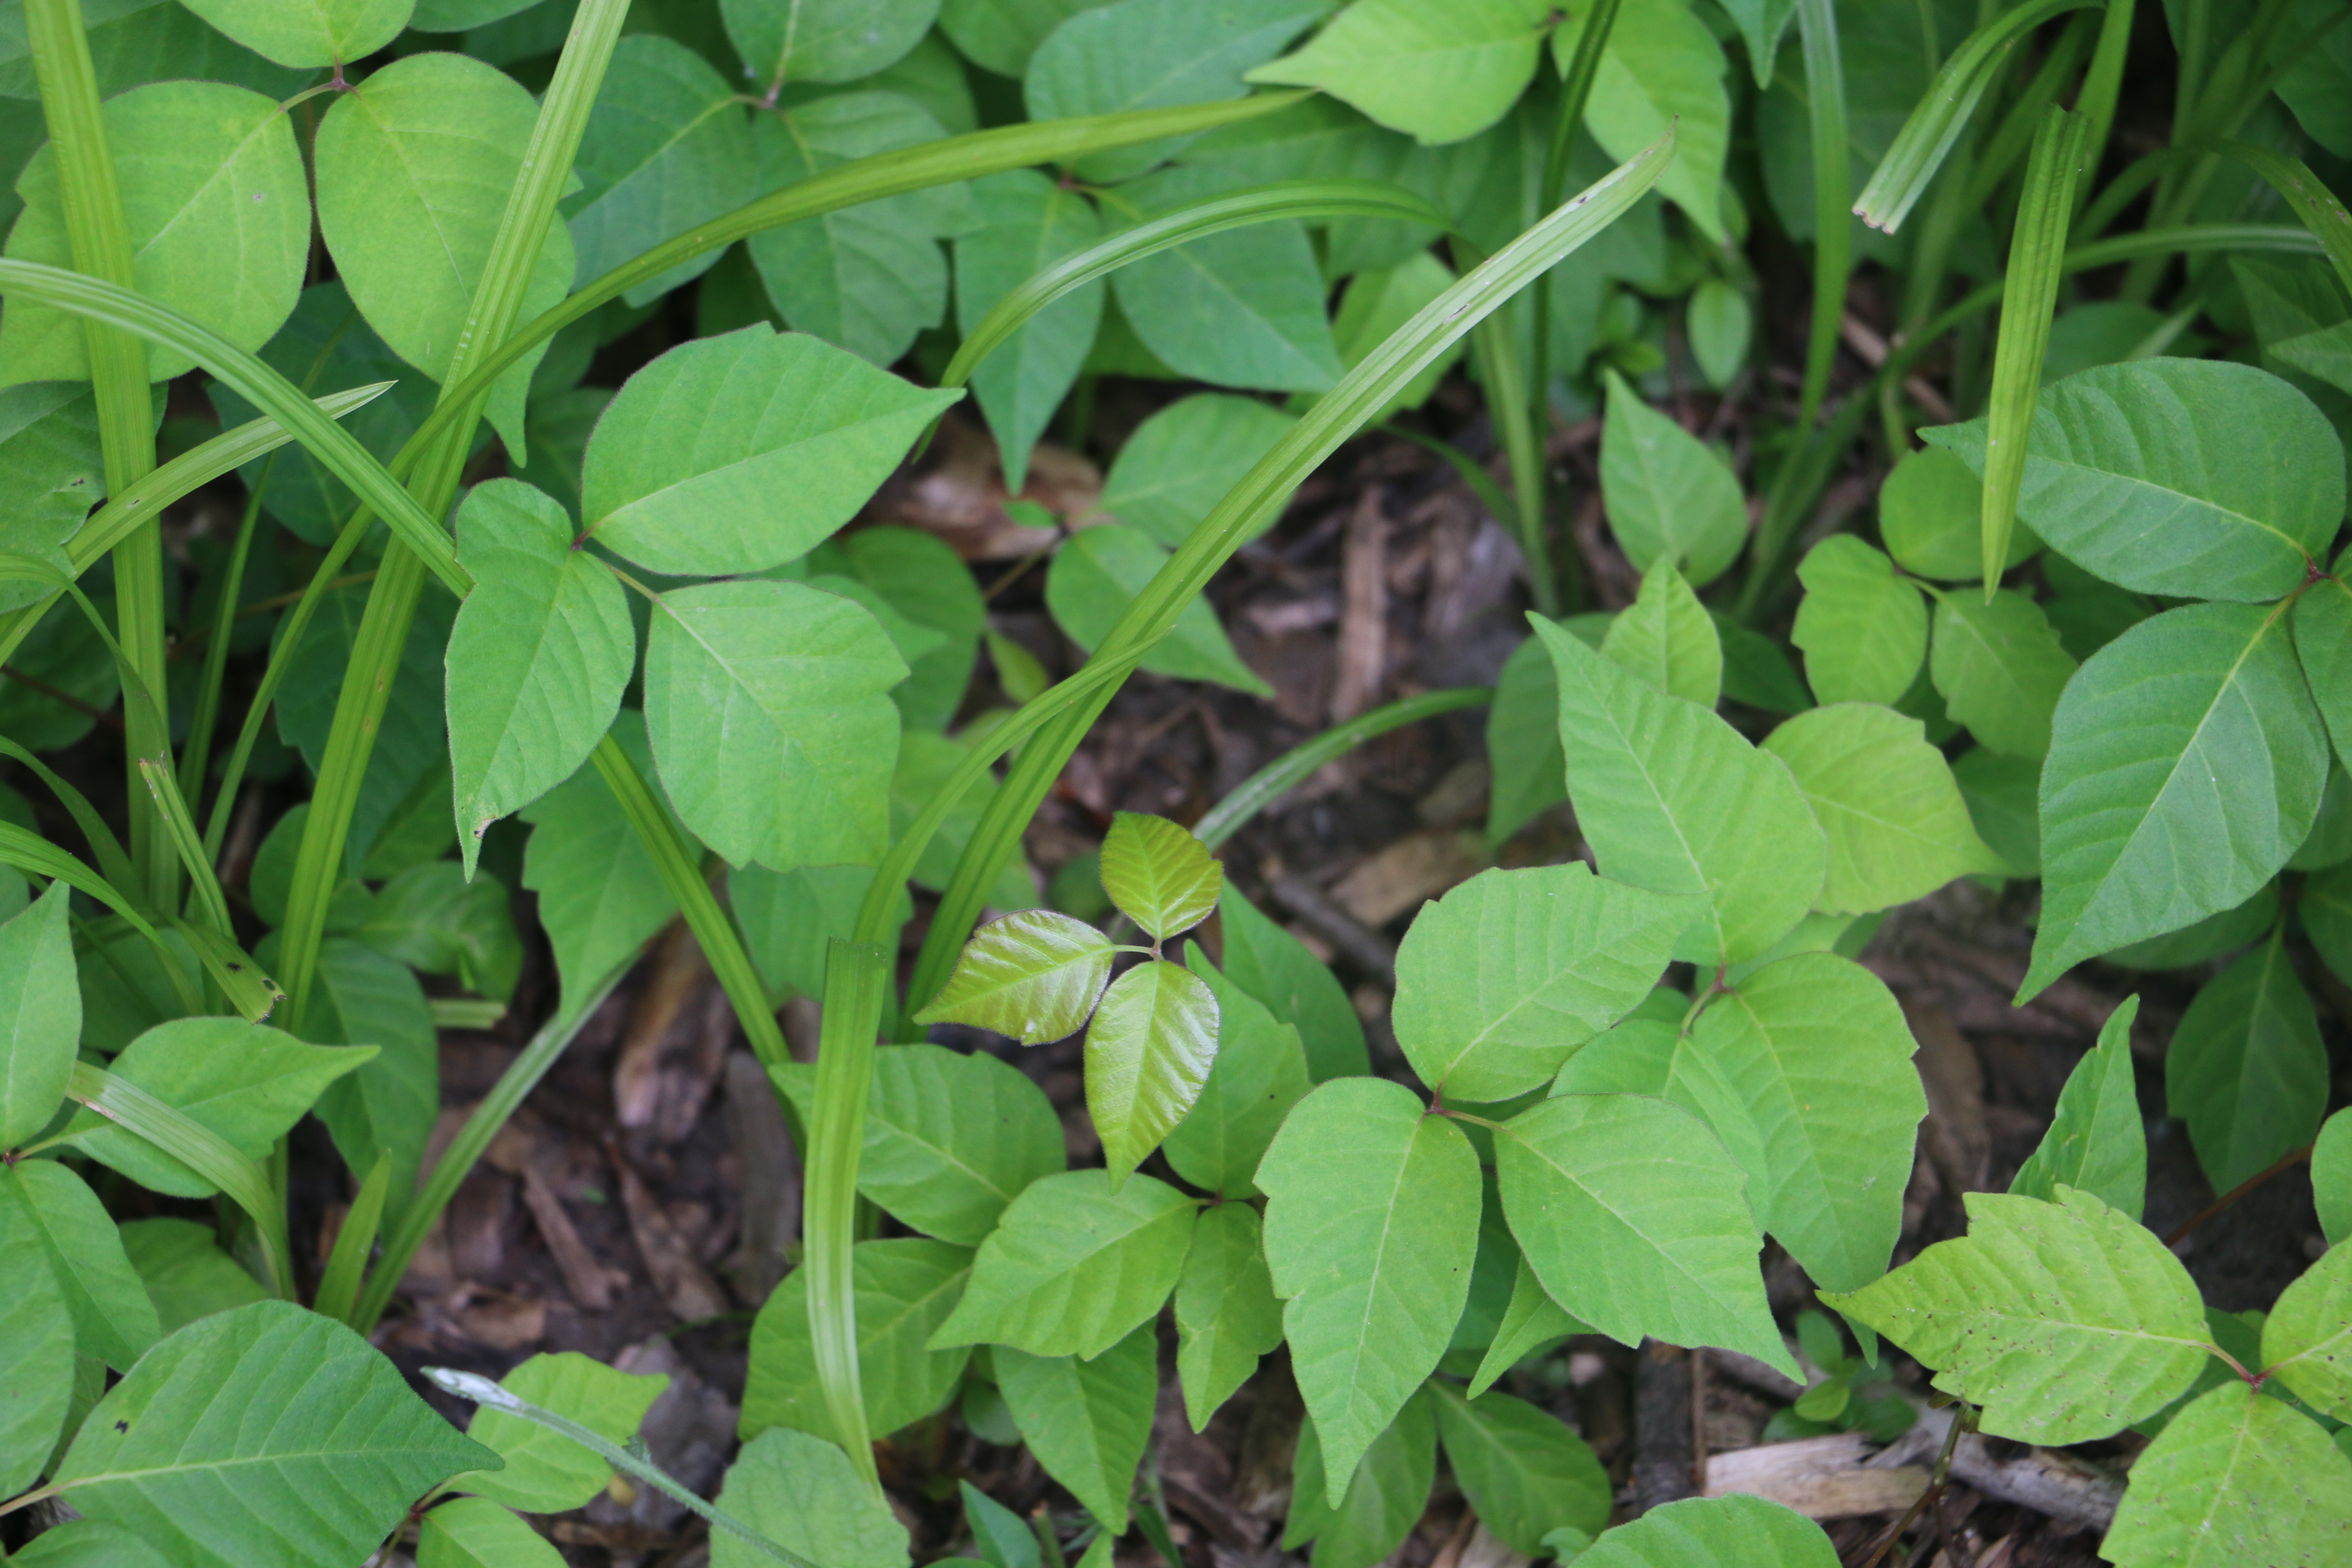 Cluster of poison ivy, three green leaves 